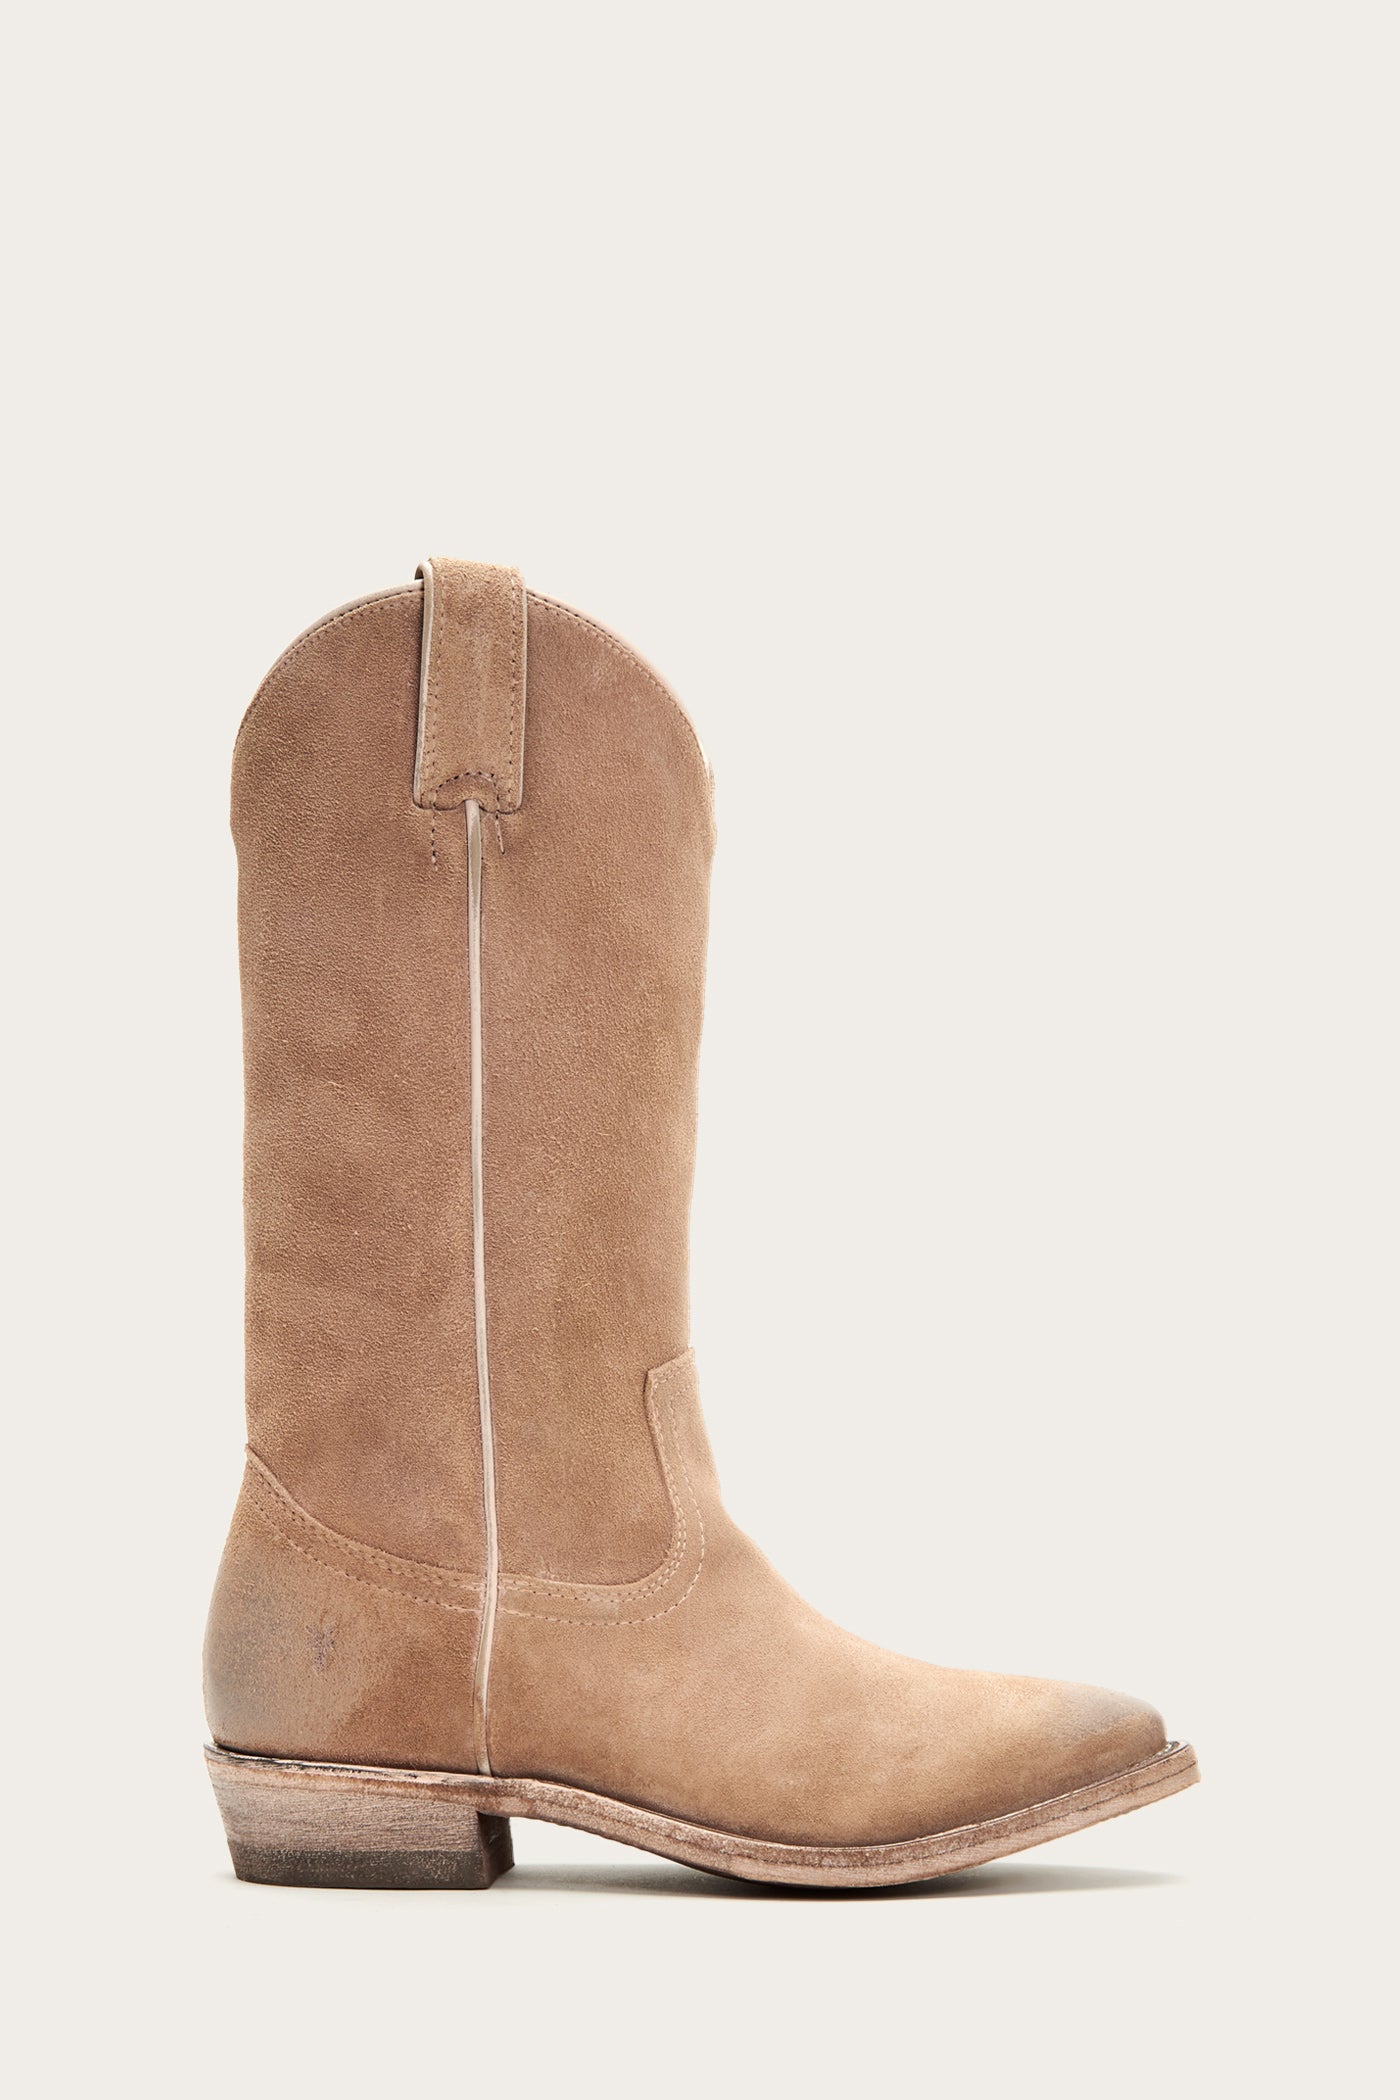 frye billy tall boot